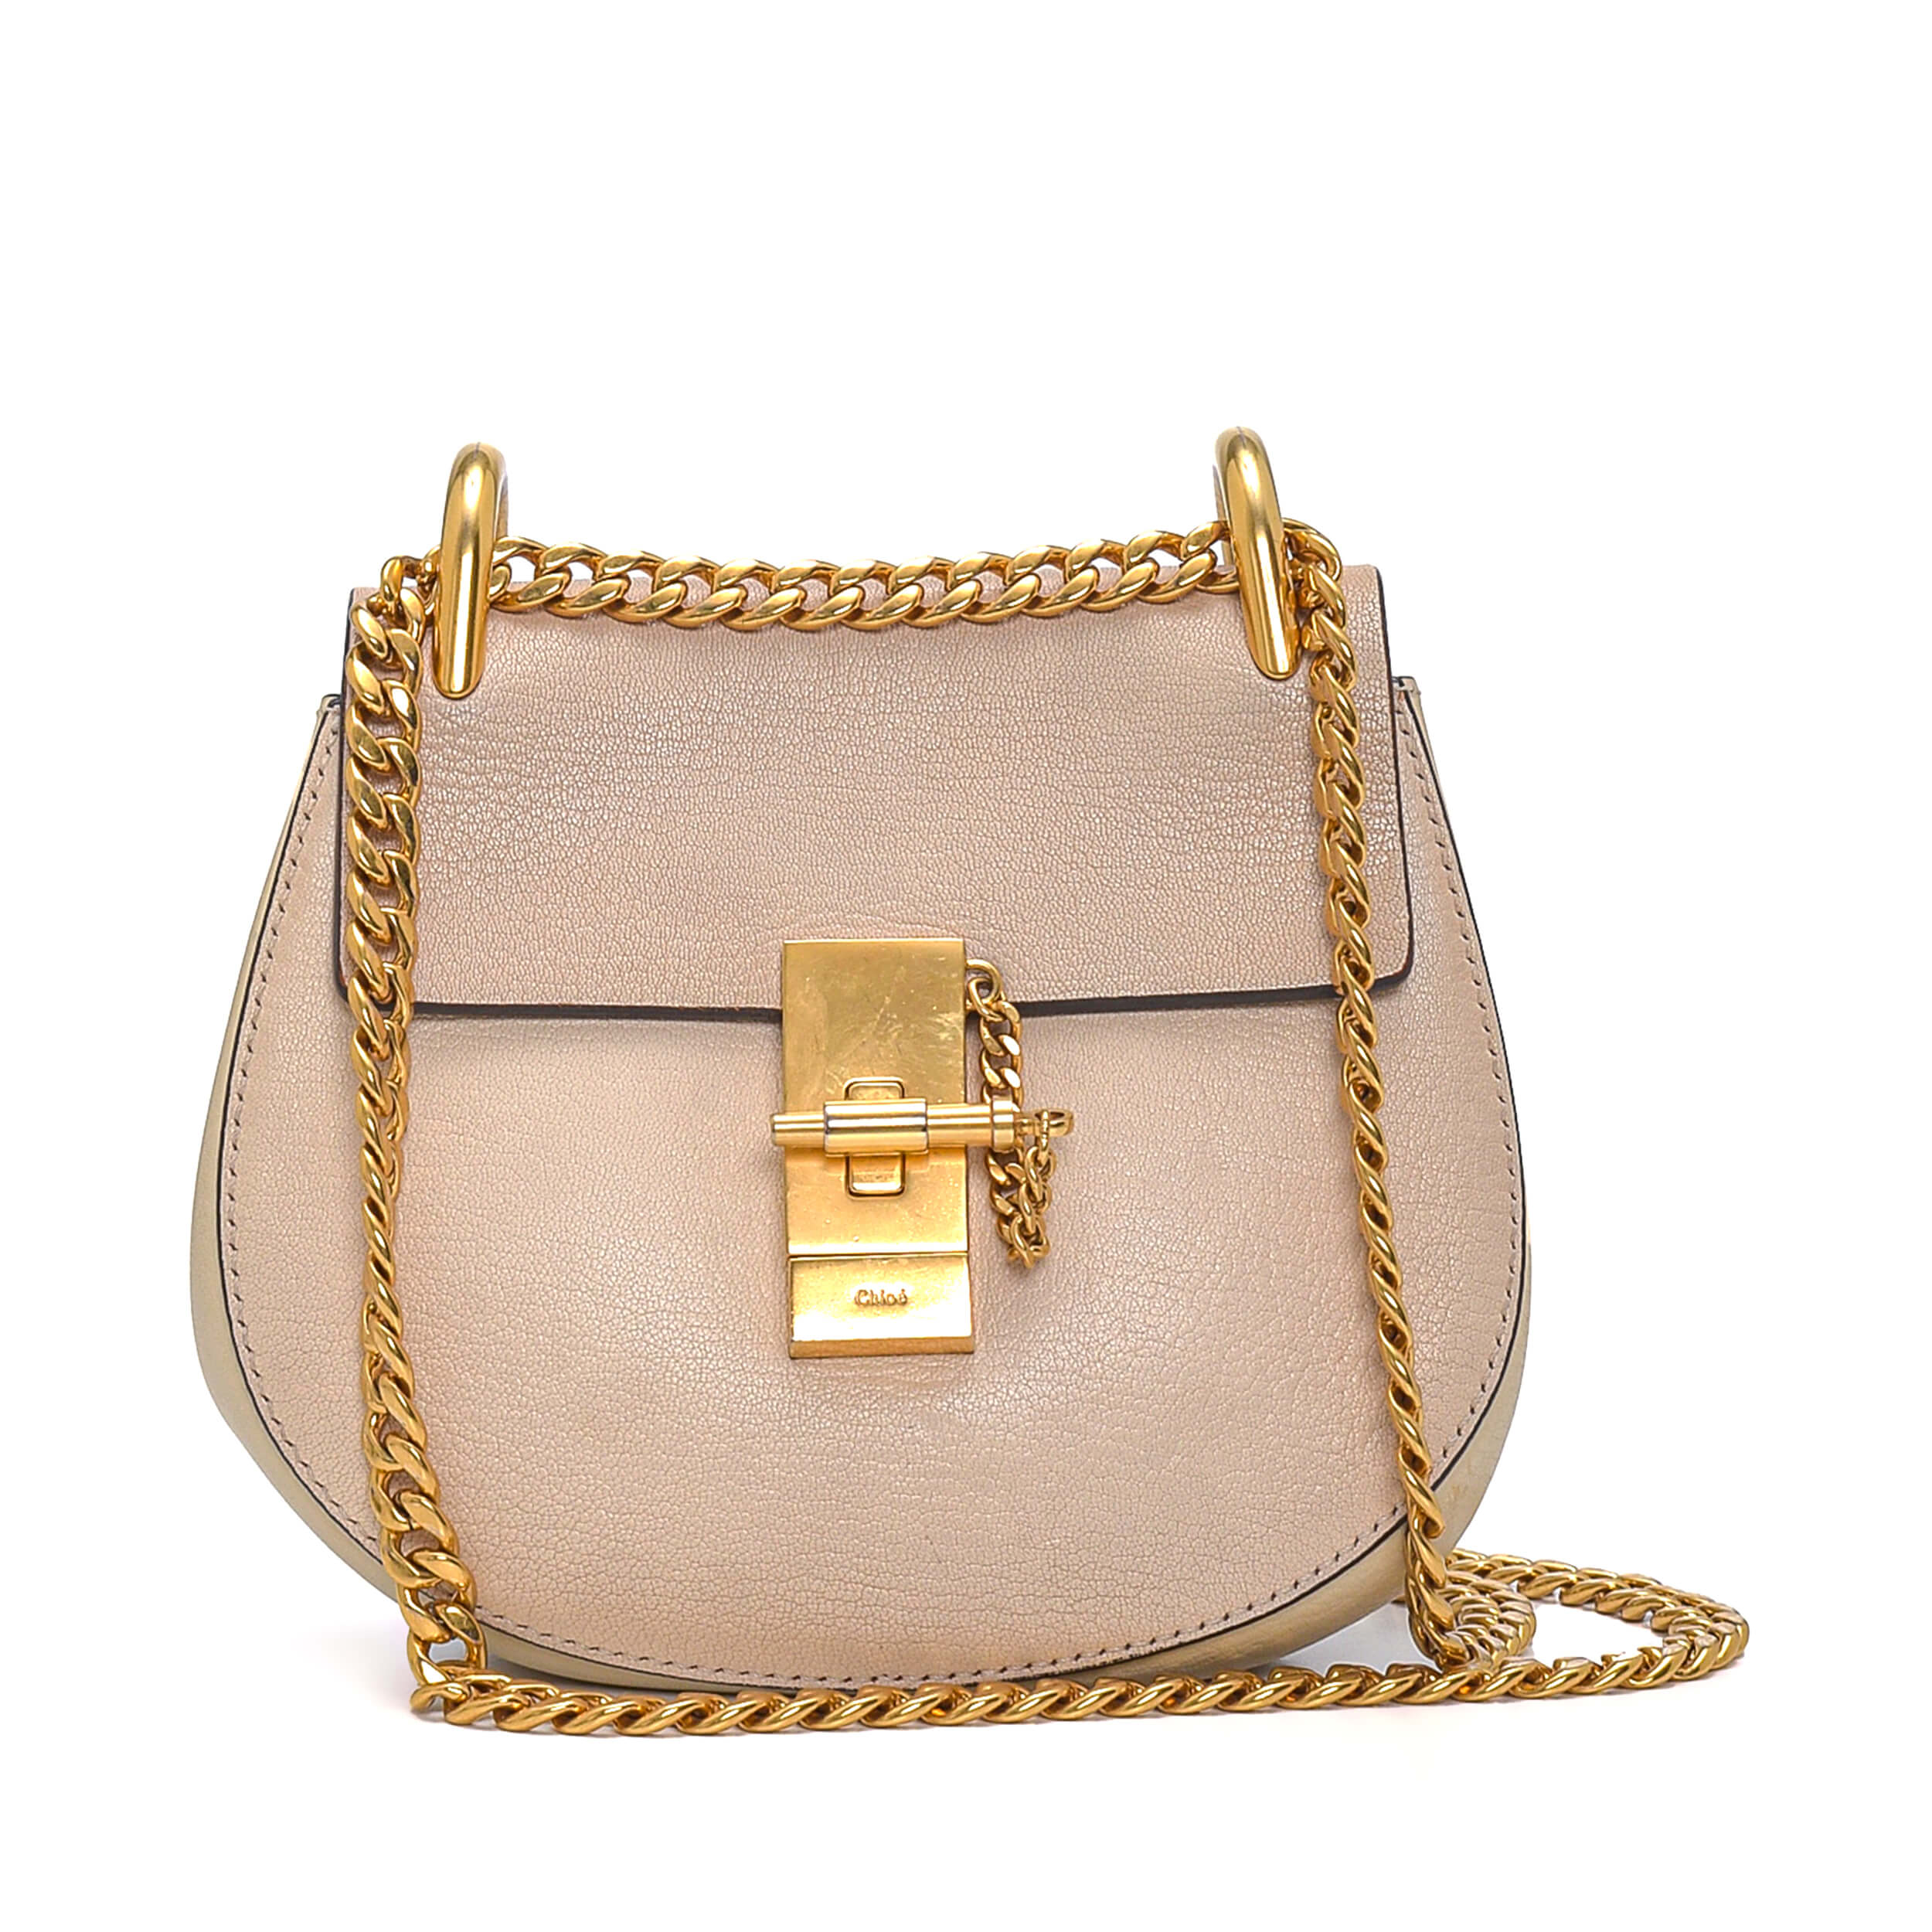 Chloe - Off White Leather Small Drew Bag